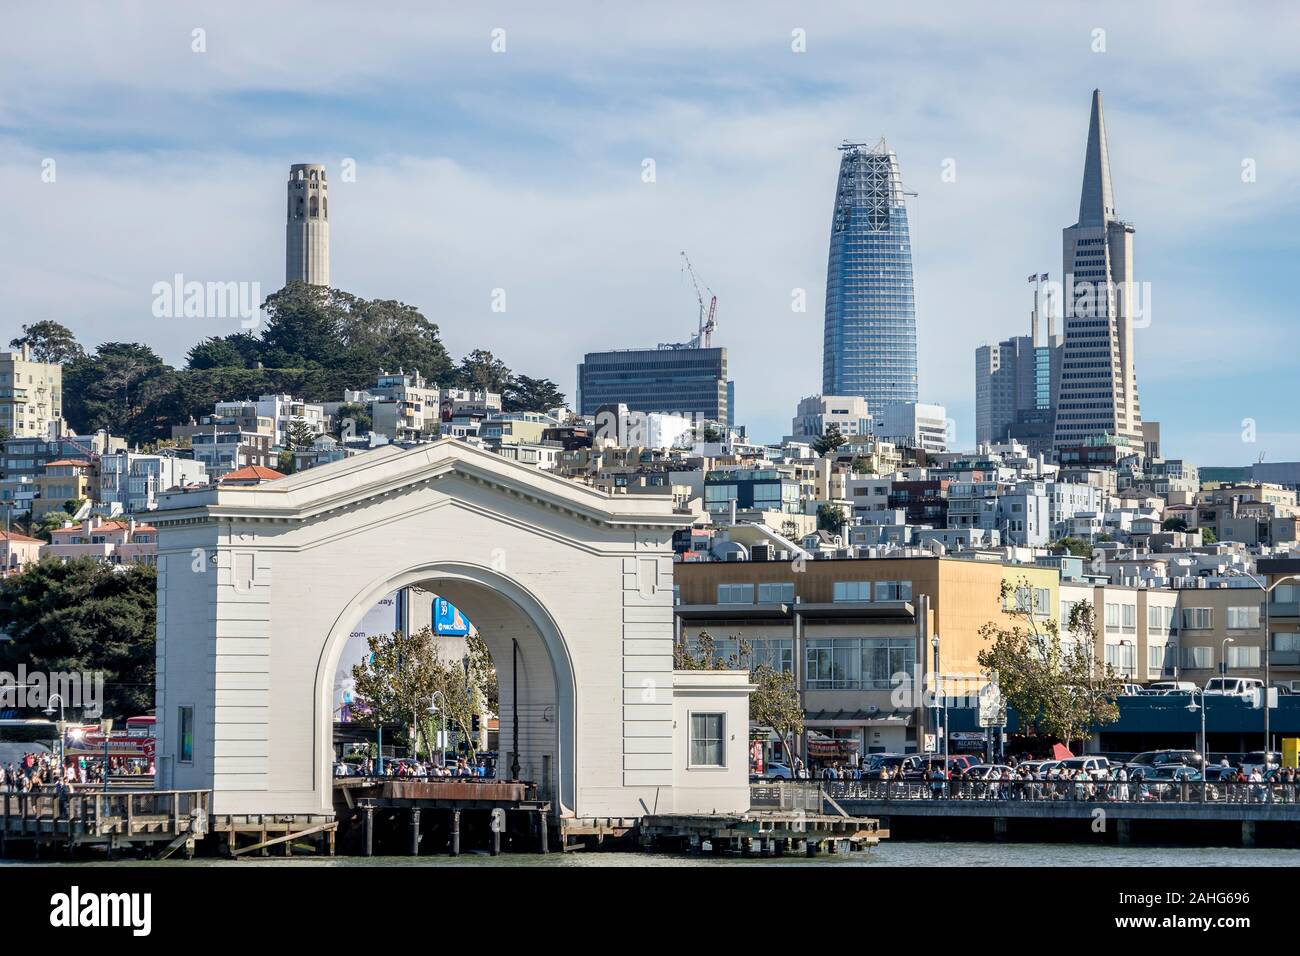 San Francisco view from the bay, including the pier 43 archway , Coit Tower, the Transamerica Pyramid, and Salesforce Tower still under construction Stock Photo